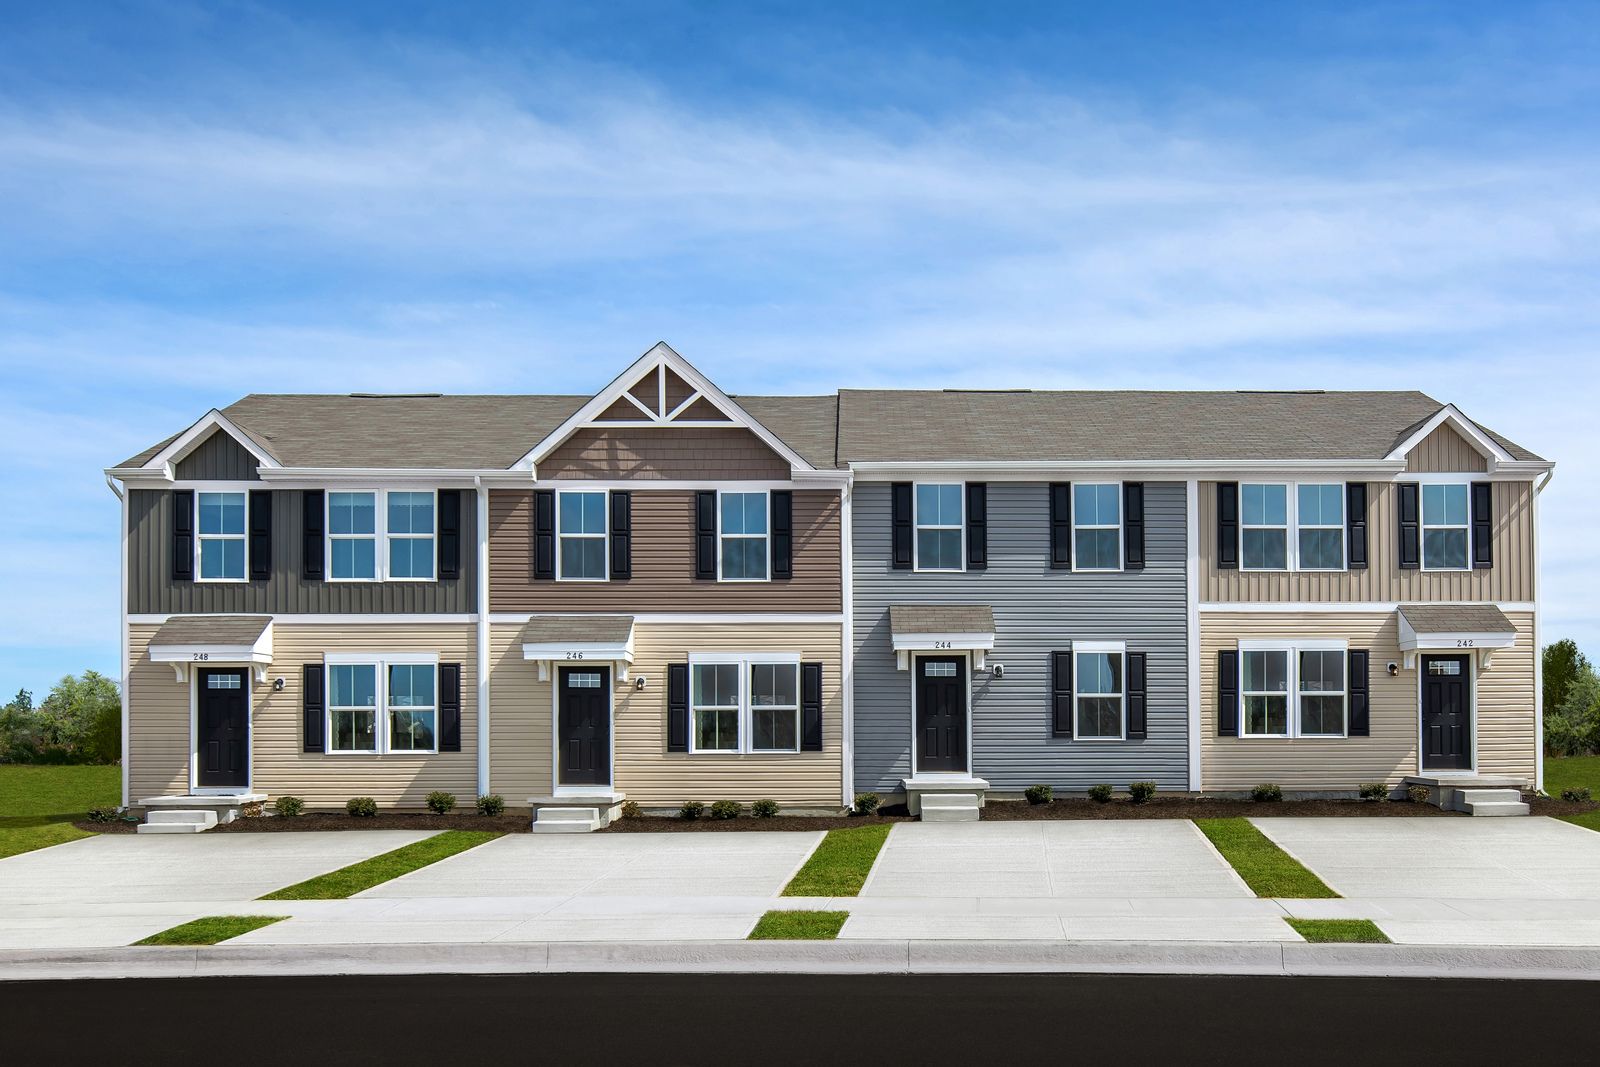 LAST CHANCE TO own a new townhome in Anderson for the same or less than rent!